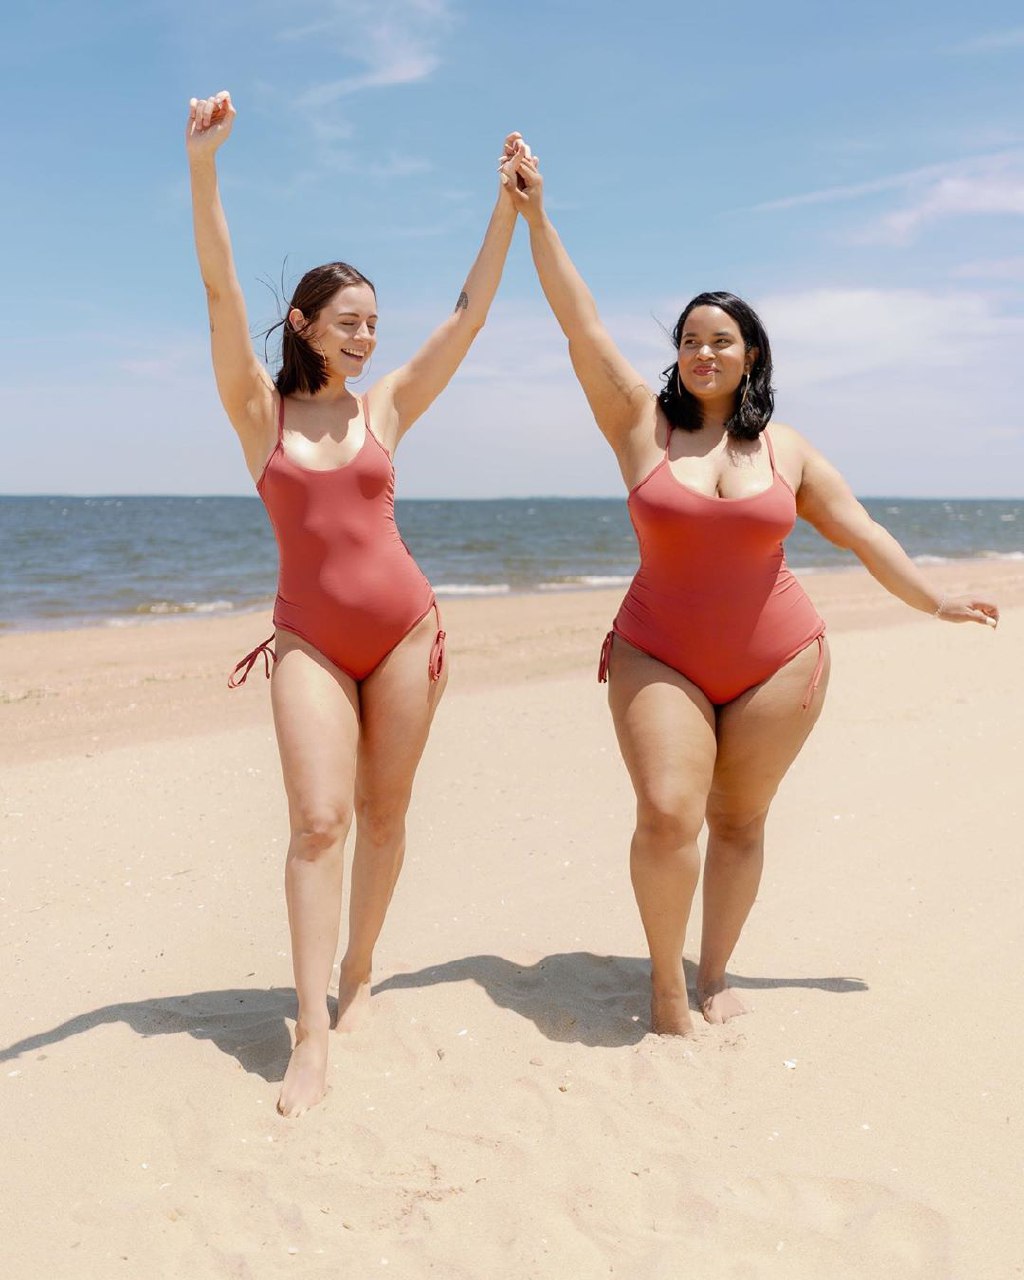 Body Positive Denise Mercedes and Maria Castellanos | Dress to Impress: Two Friends Show that Style Shines on Every Body | Herbeauty